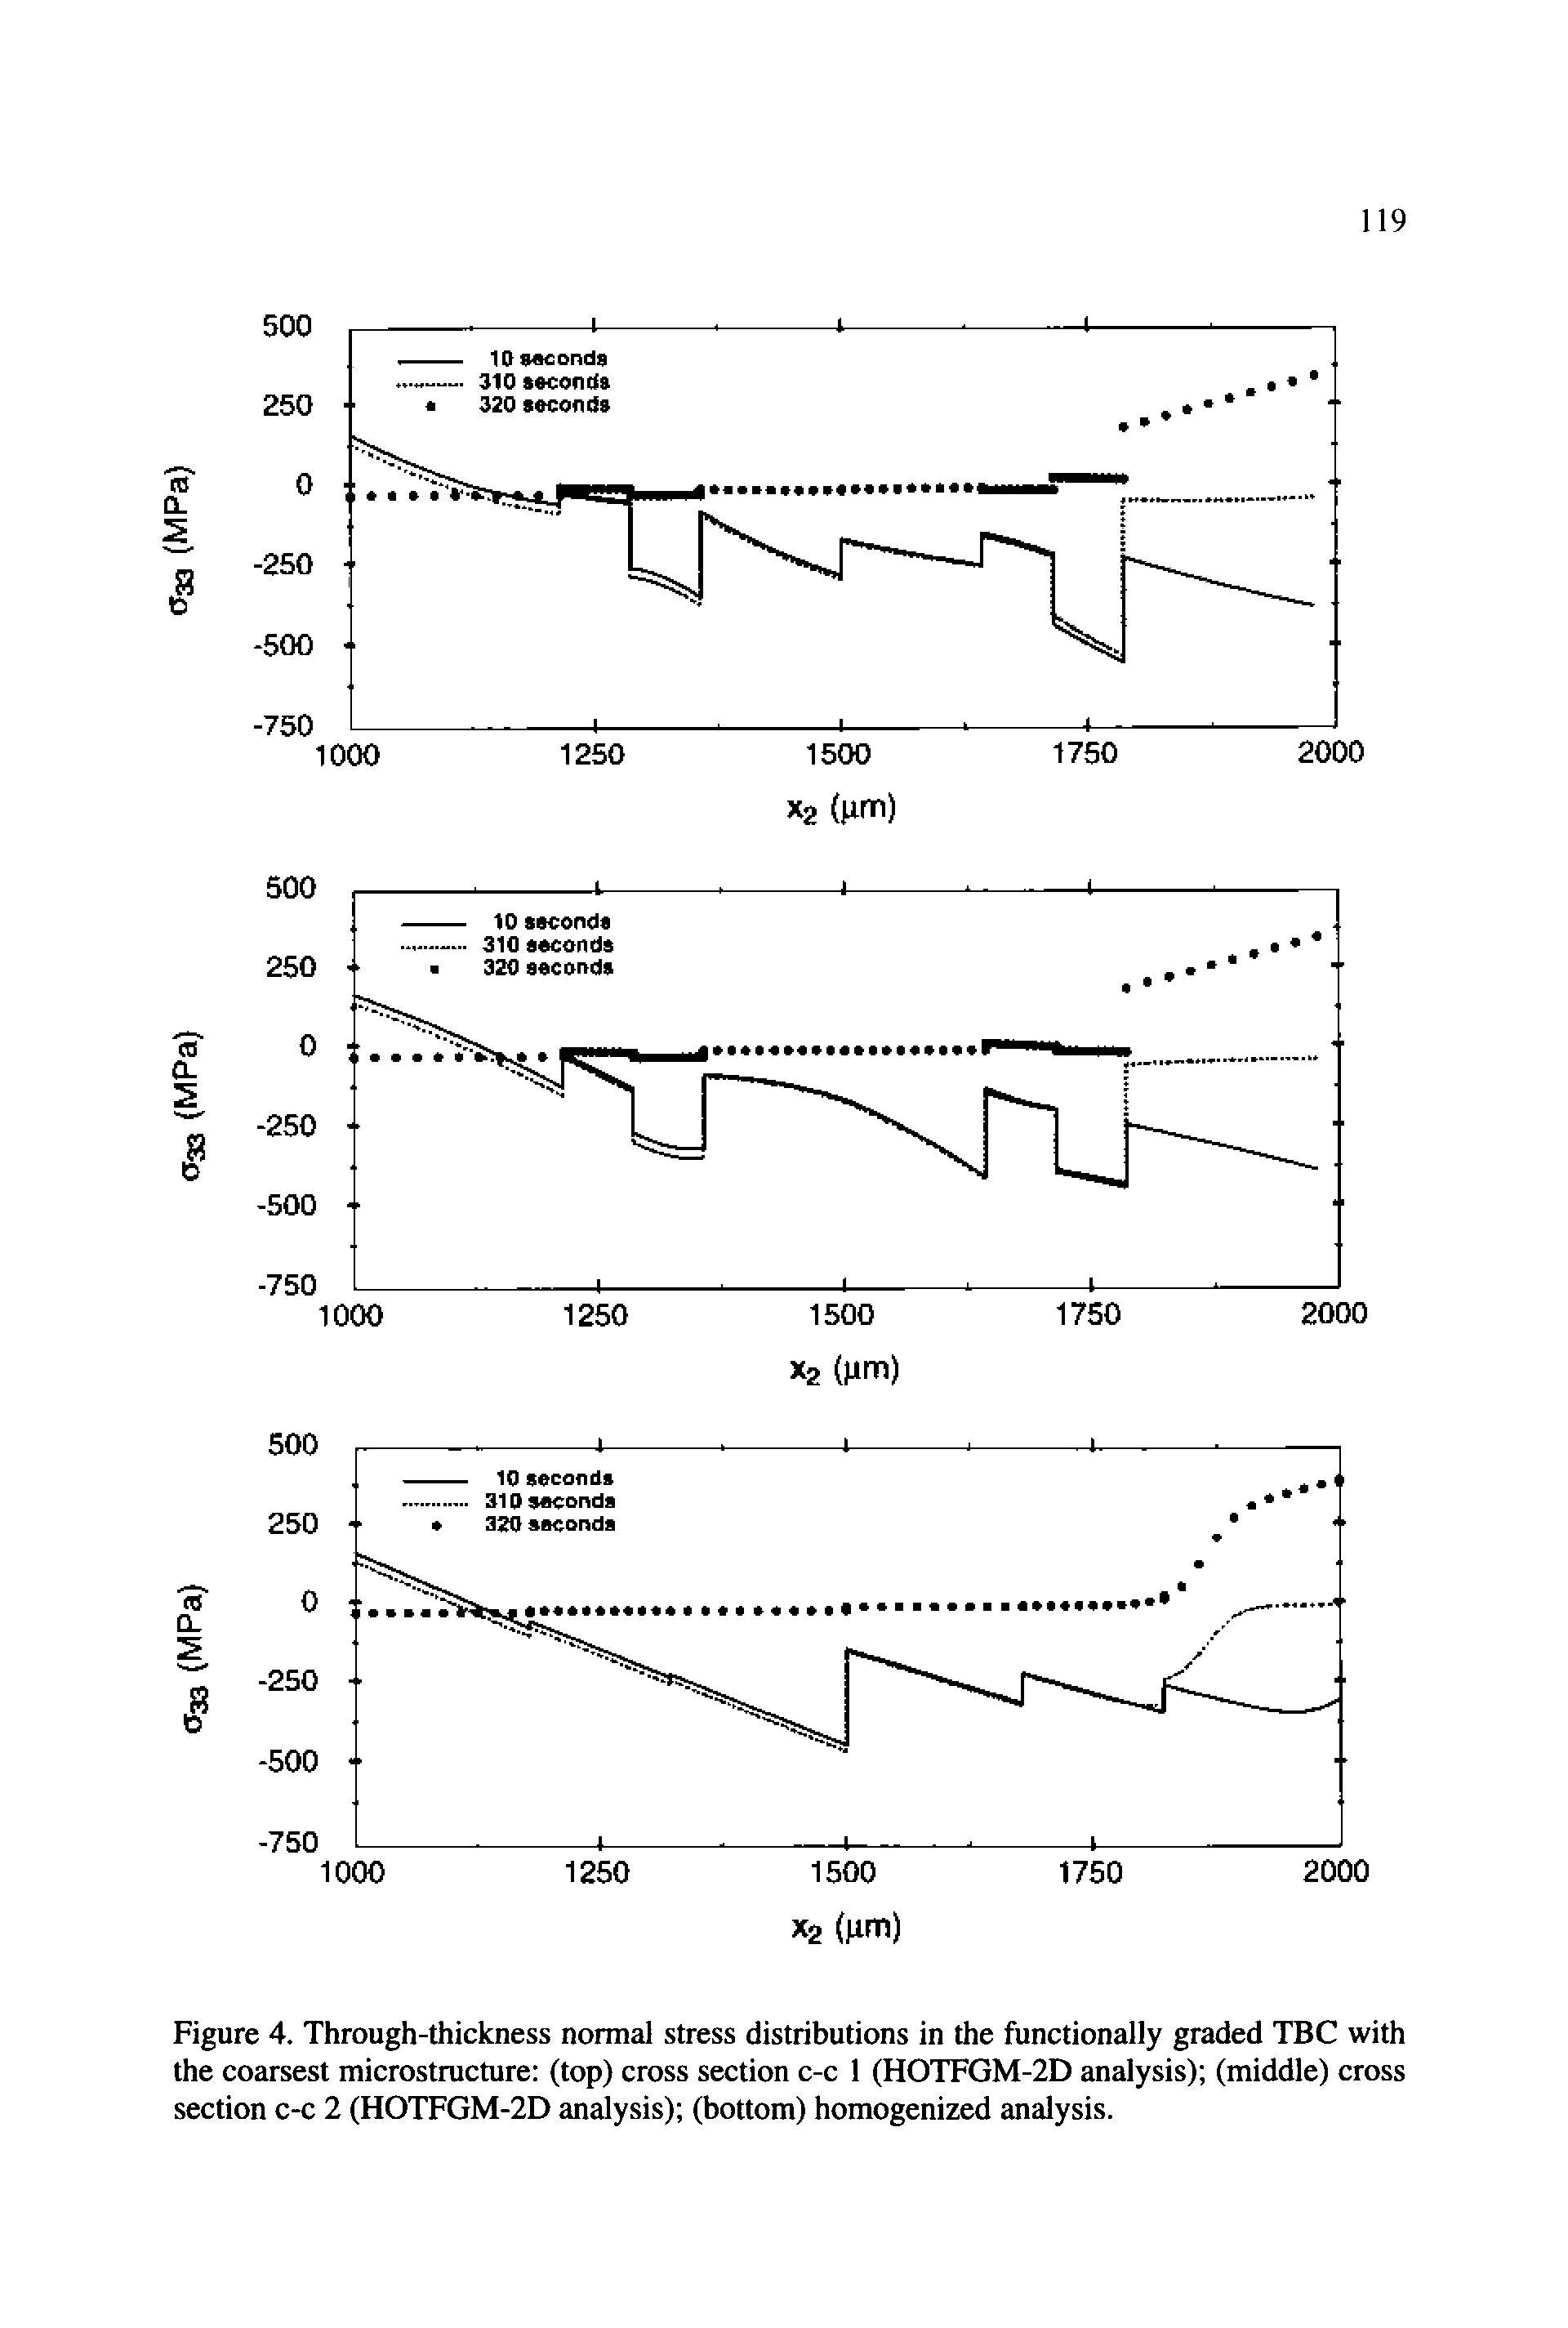 Figure 4. Through-thickness normal stress distributions in the functionally graded TBC with the coarsest microstructure (top) cross section c-c 1 (HOTFGM-2D analysis) (middle) cross section c-c 2 (HOTFGM-2D analysis) (bottom) homogenized analysis.